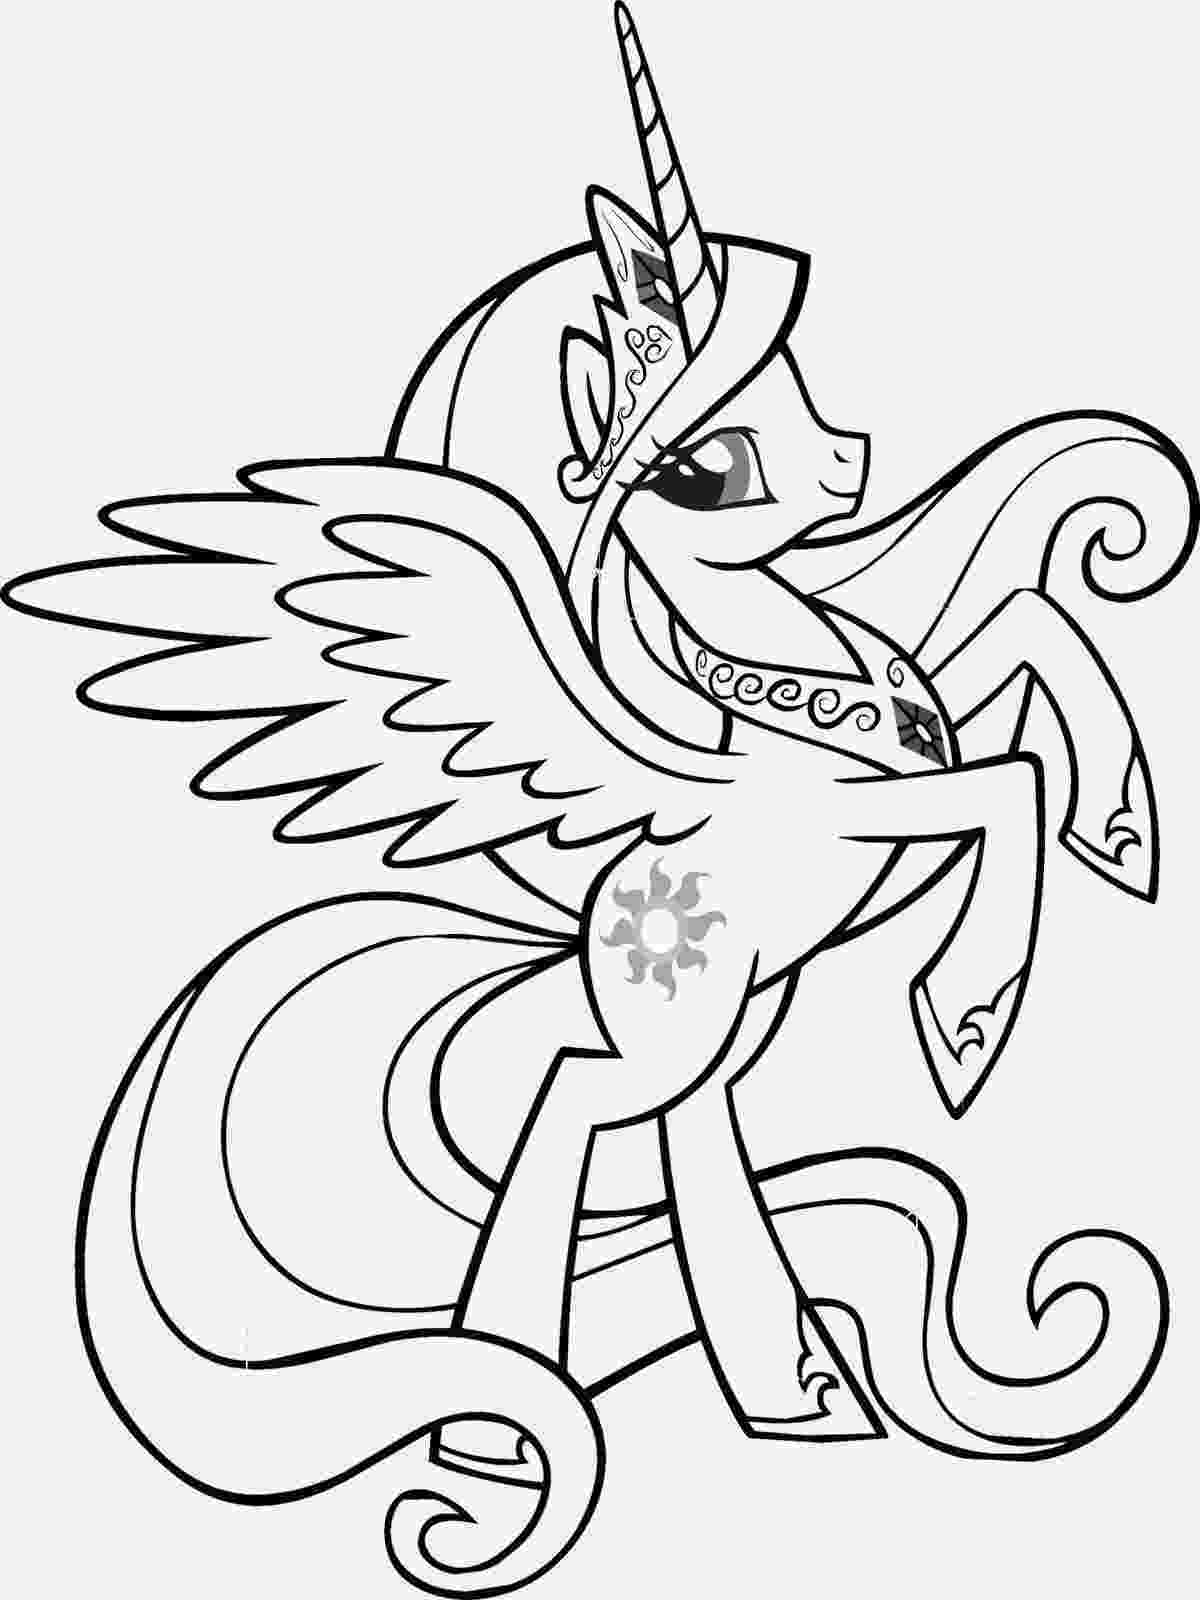 my little pony friendship is magic coloring pages a friendship is magic my little pony coloring pages printable my is little pages pony magic friendship coloring 